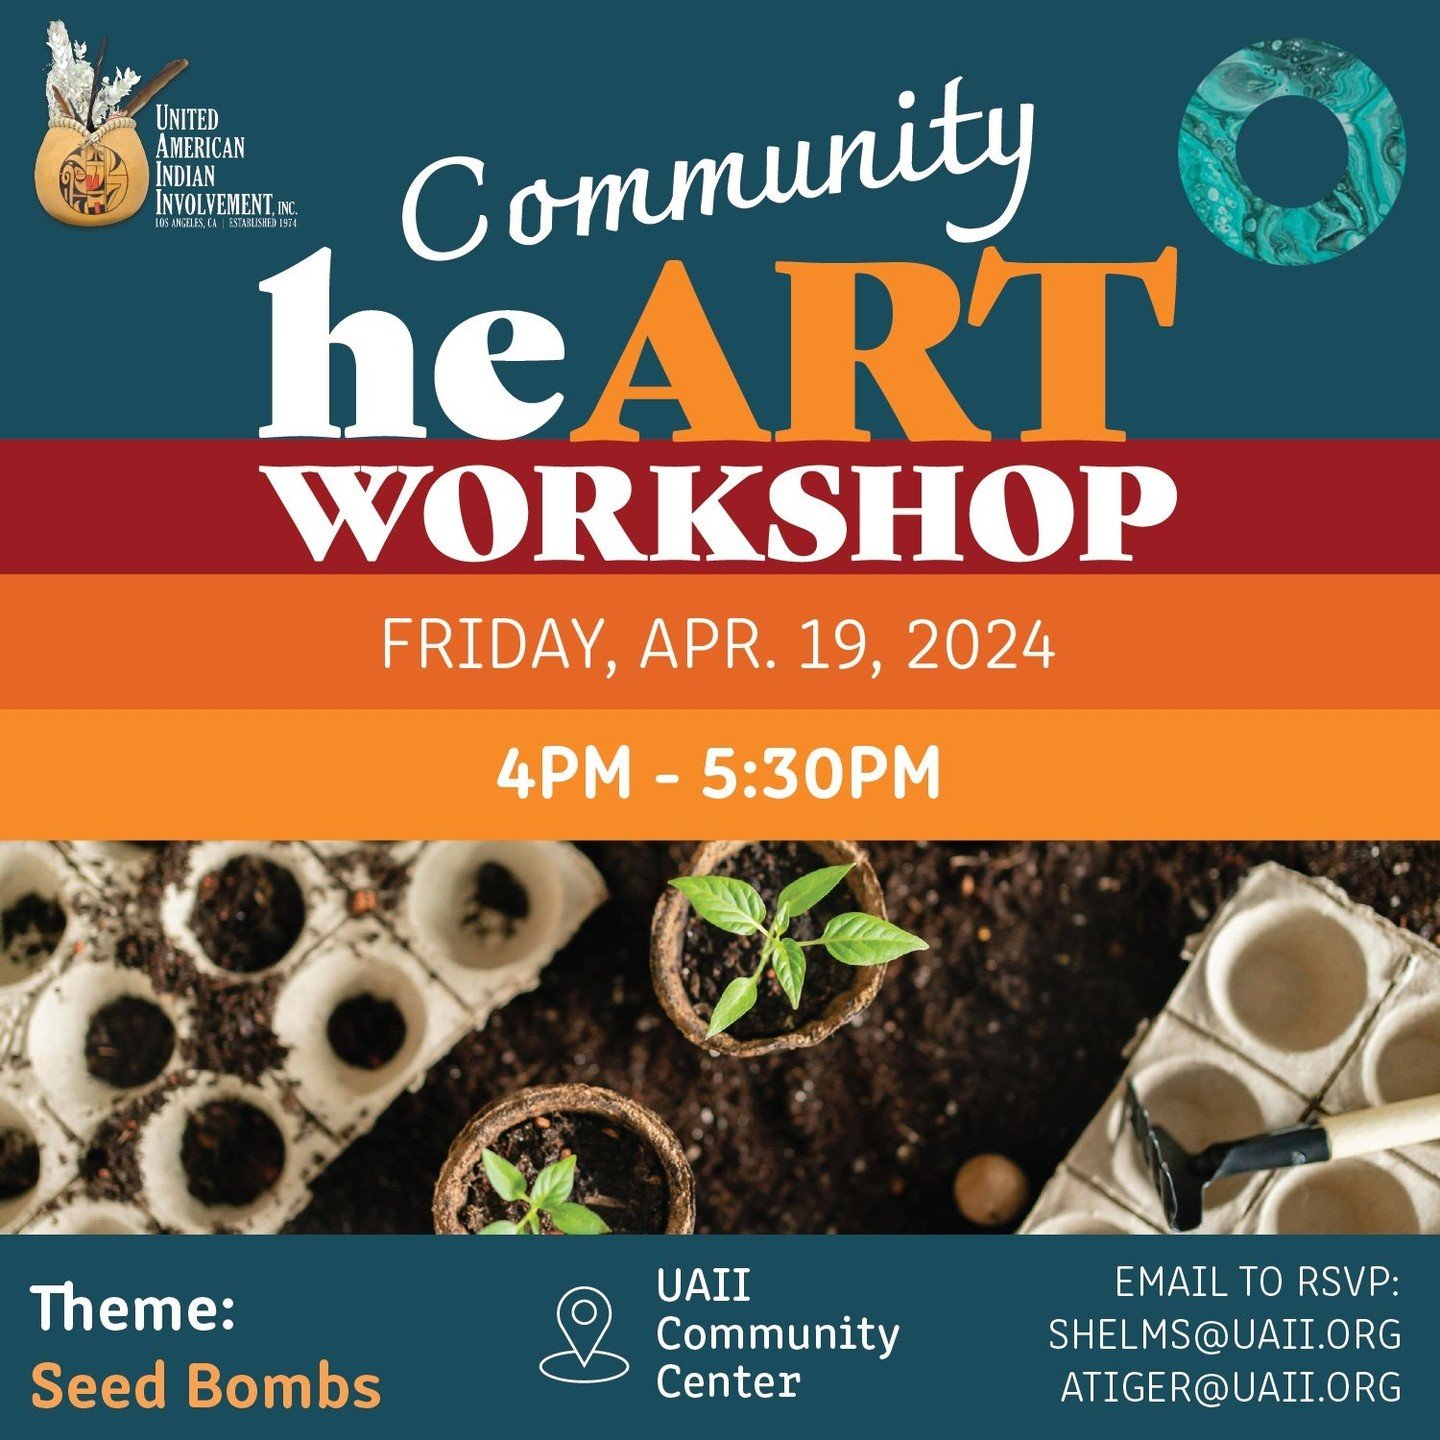 Community heART workshop: Seed Bombs: 🌱✨ Join the CHWs &amp; The Chapter House for an inspiring Community heARt workshop during Earth Week! 🌍 We're hosting a hands-on Seed Bombs event to promote environmental sustainability and community health.⁠
⁠